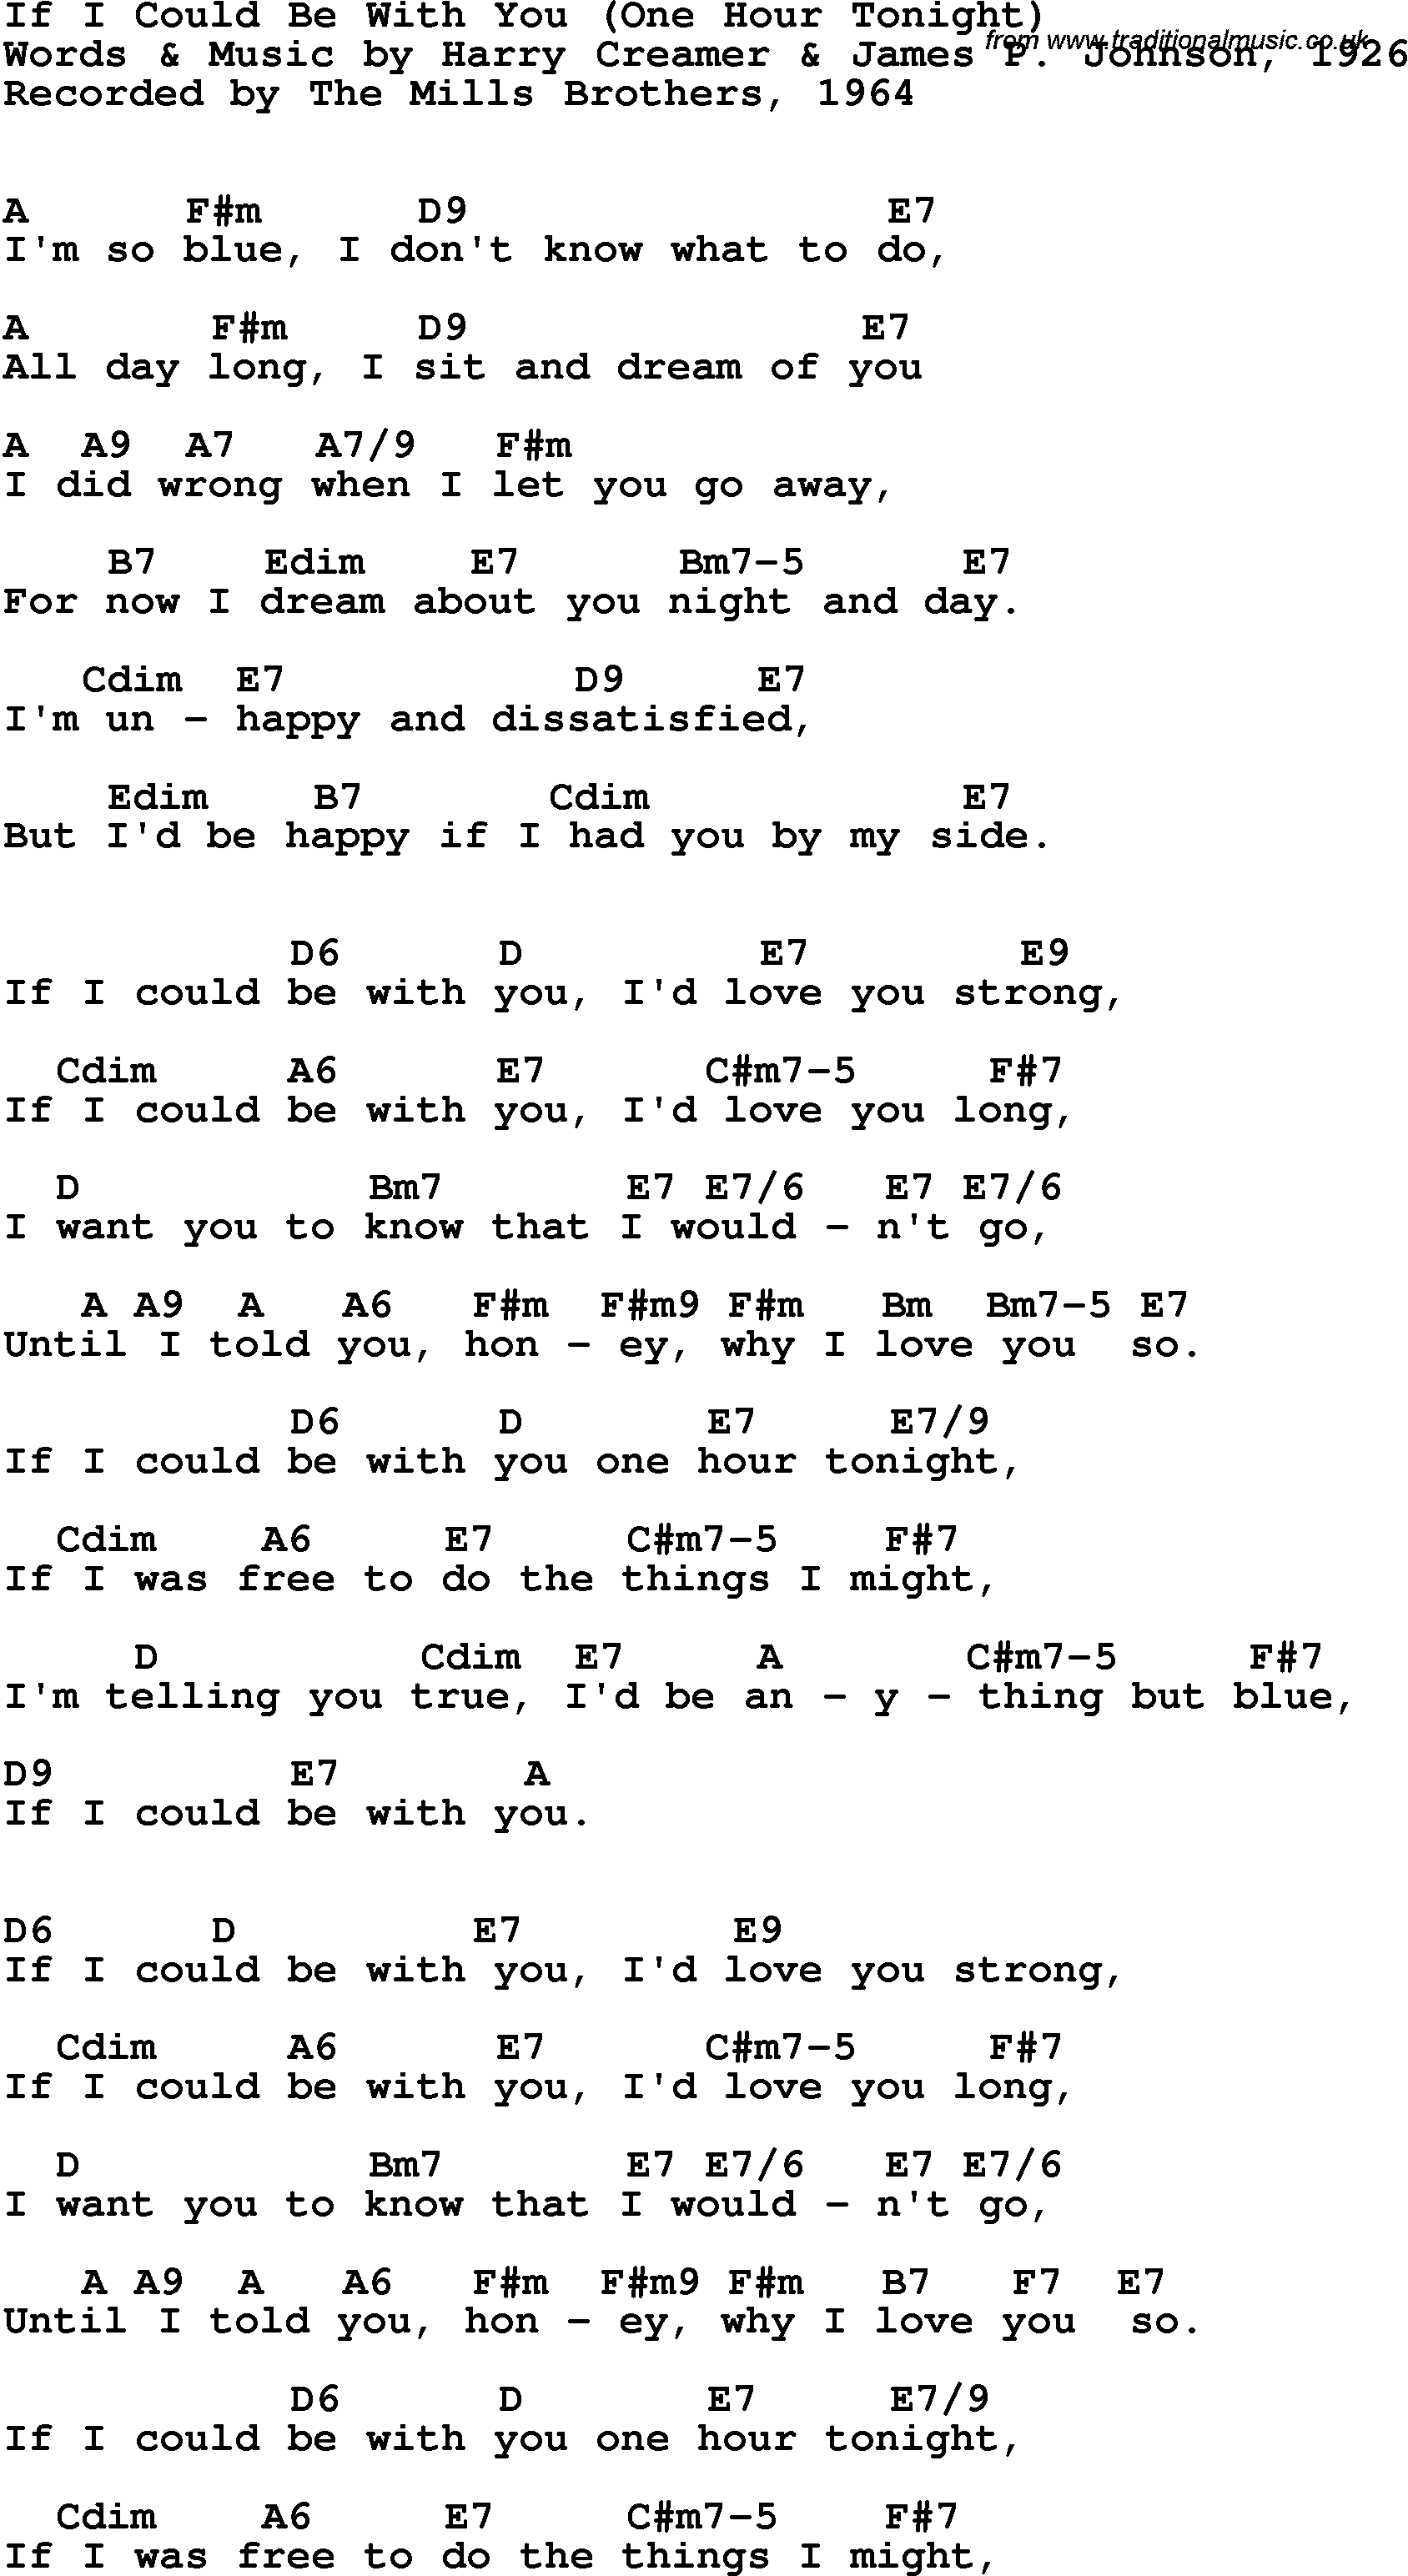 Song Lyrics with guitar chords for If I Could Be With You - The Mills Brothers, 1964